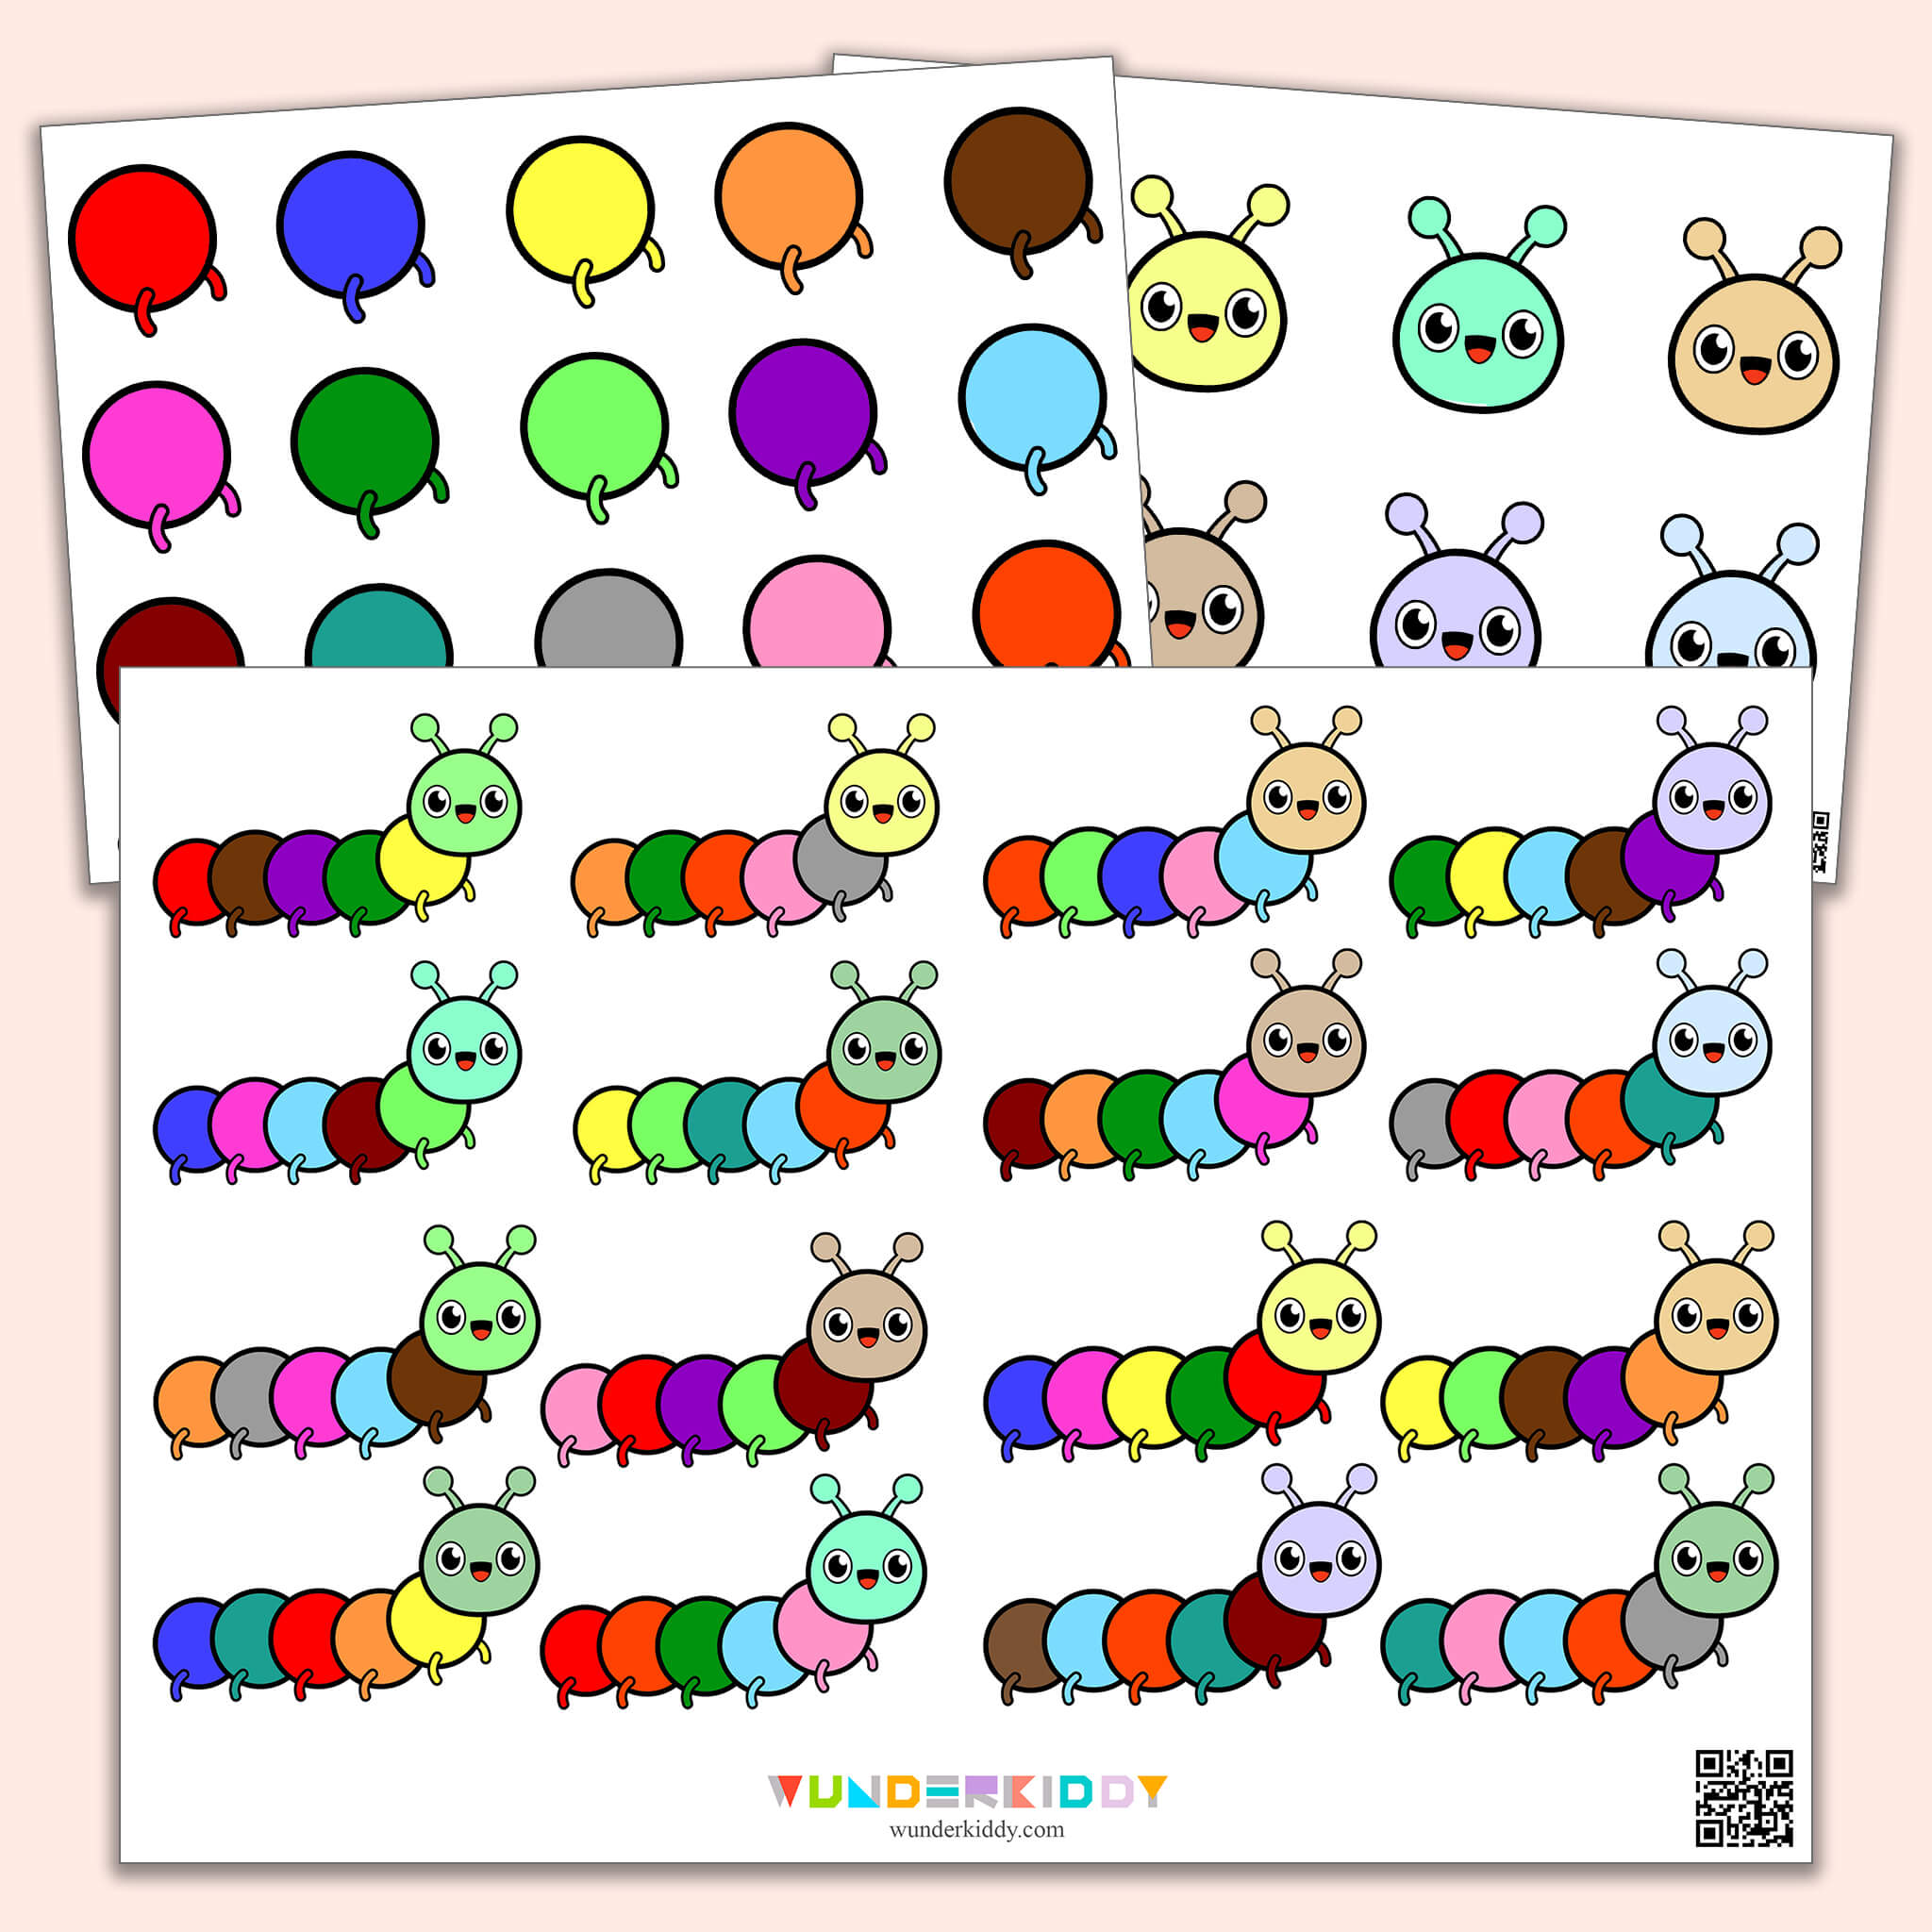 Caterpillar Colored Patterns Activity for Preschoolers